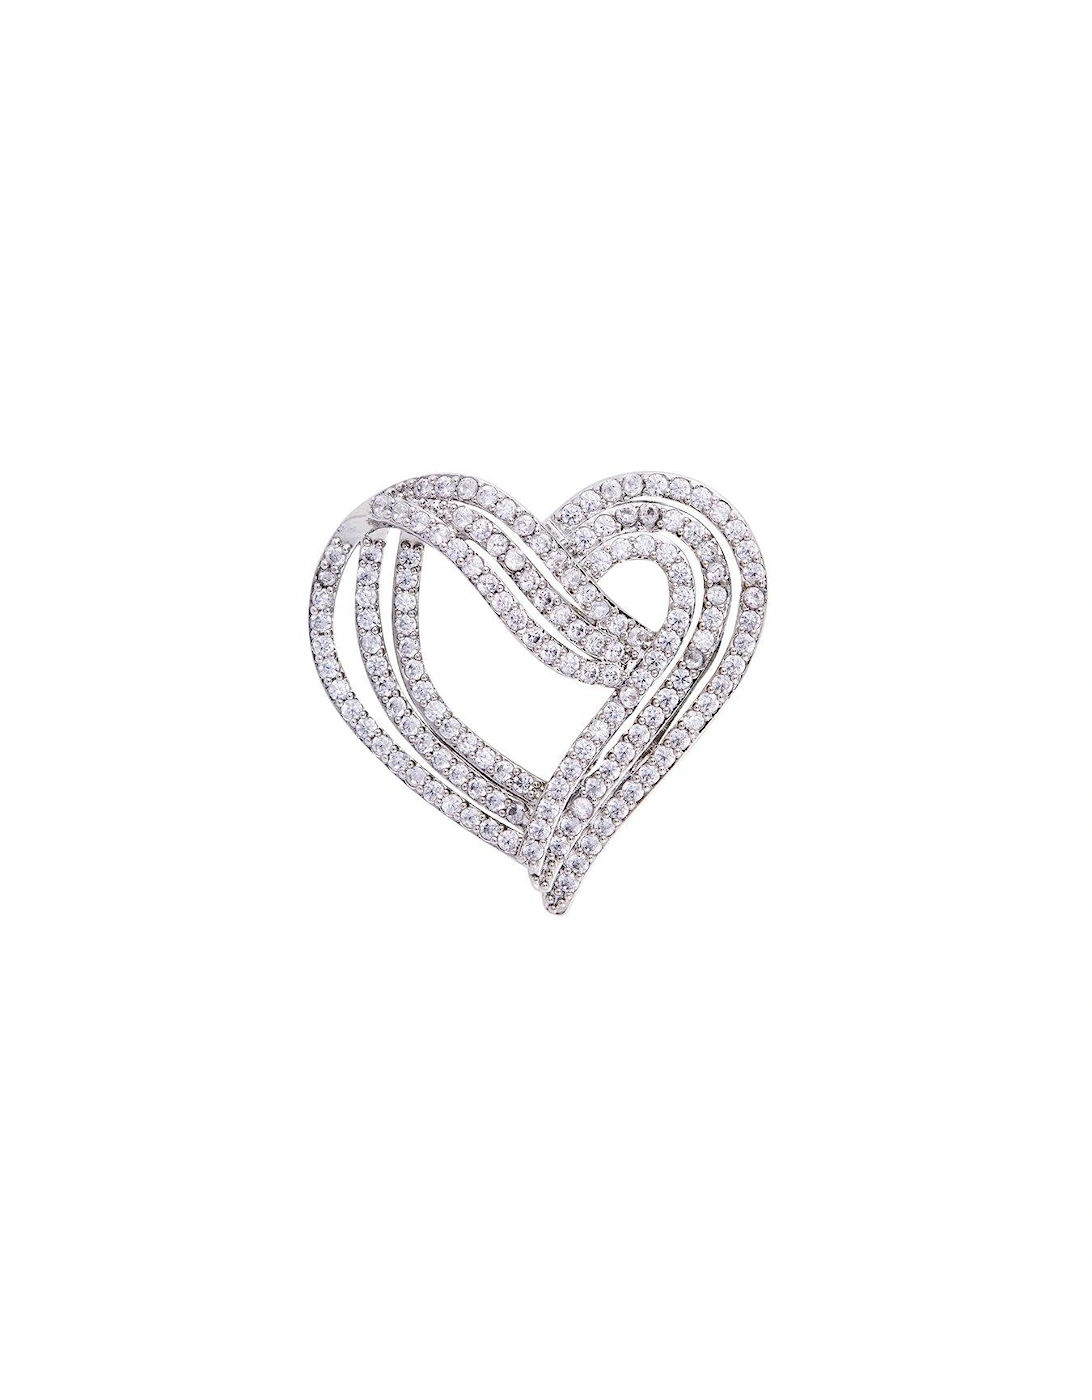 Gift Boxed Rhodium Plate Cubic Zirconia Heart Brooch